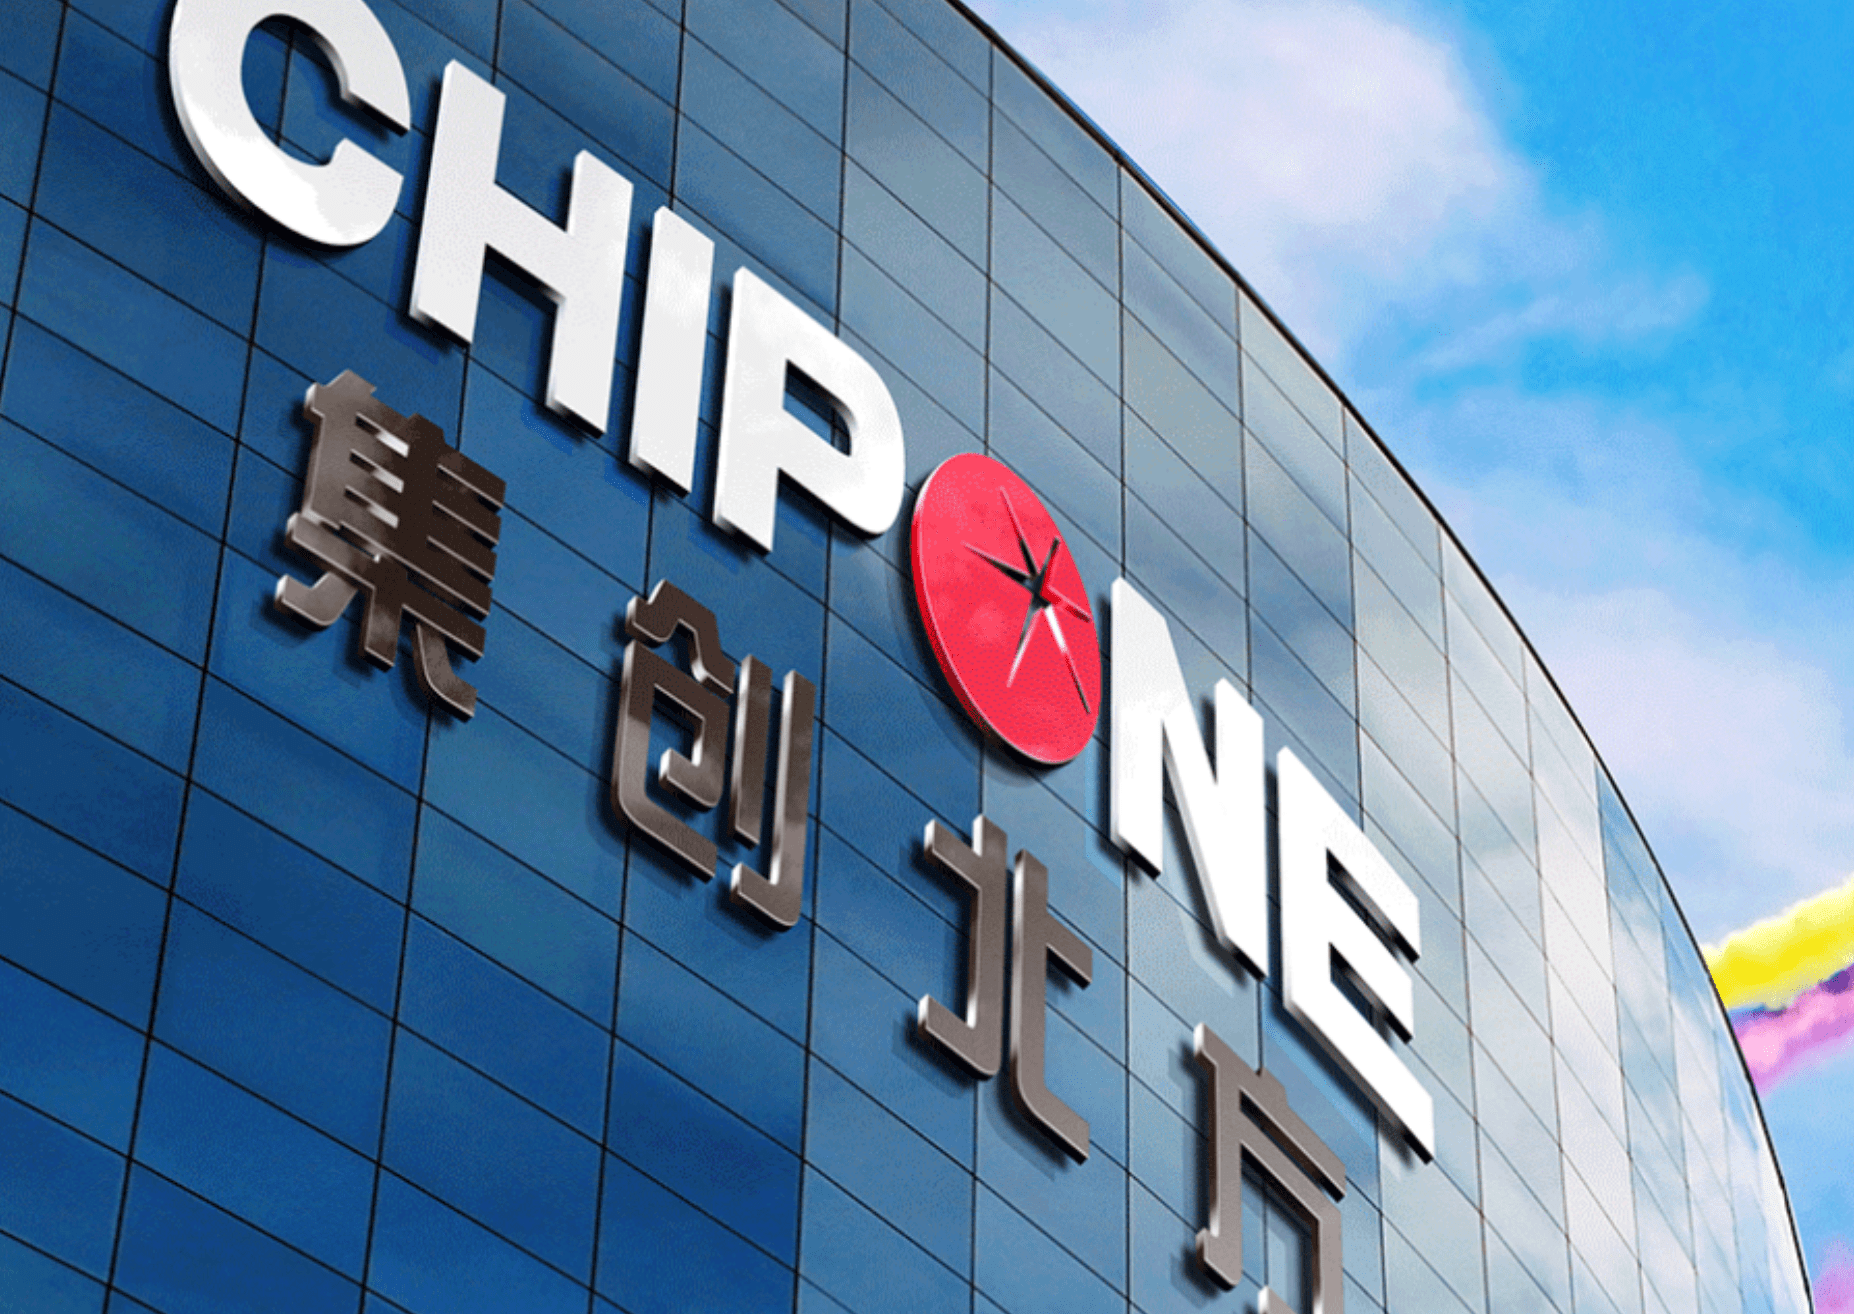 Chinese chip designer Chipone valued at $4.7b after Oceanpine-led $1b Series E round